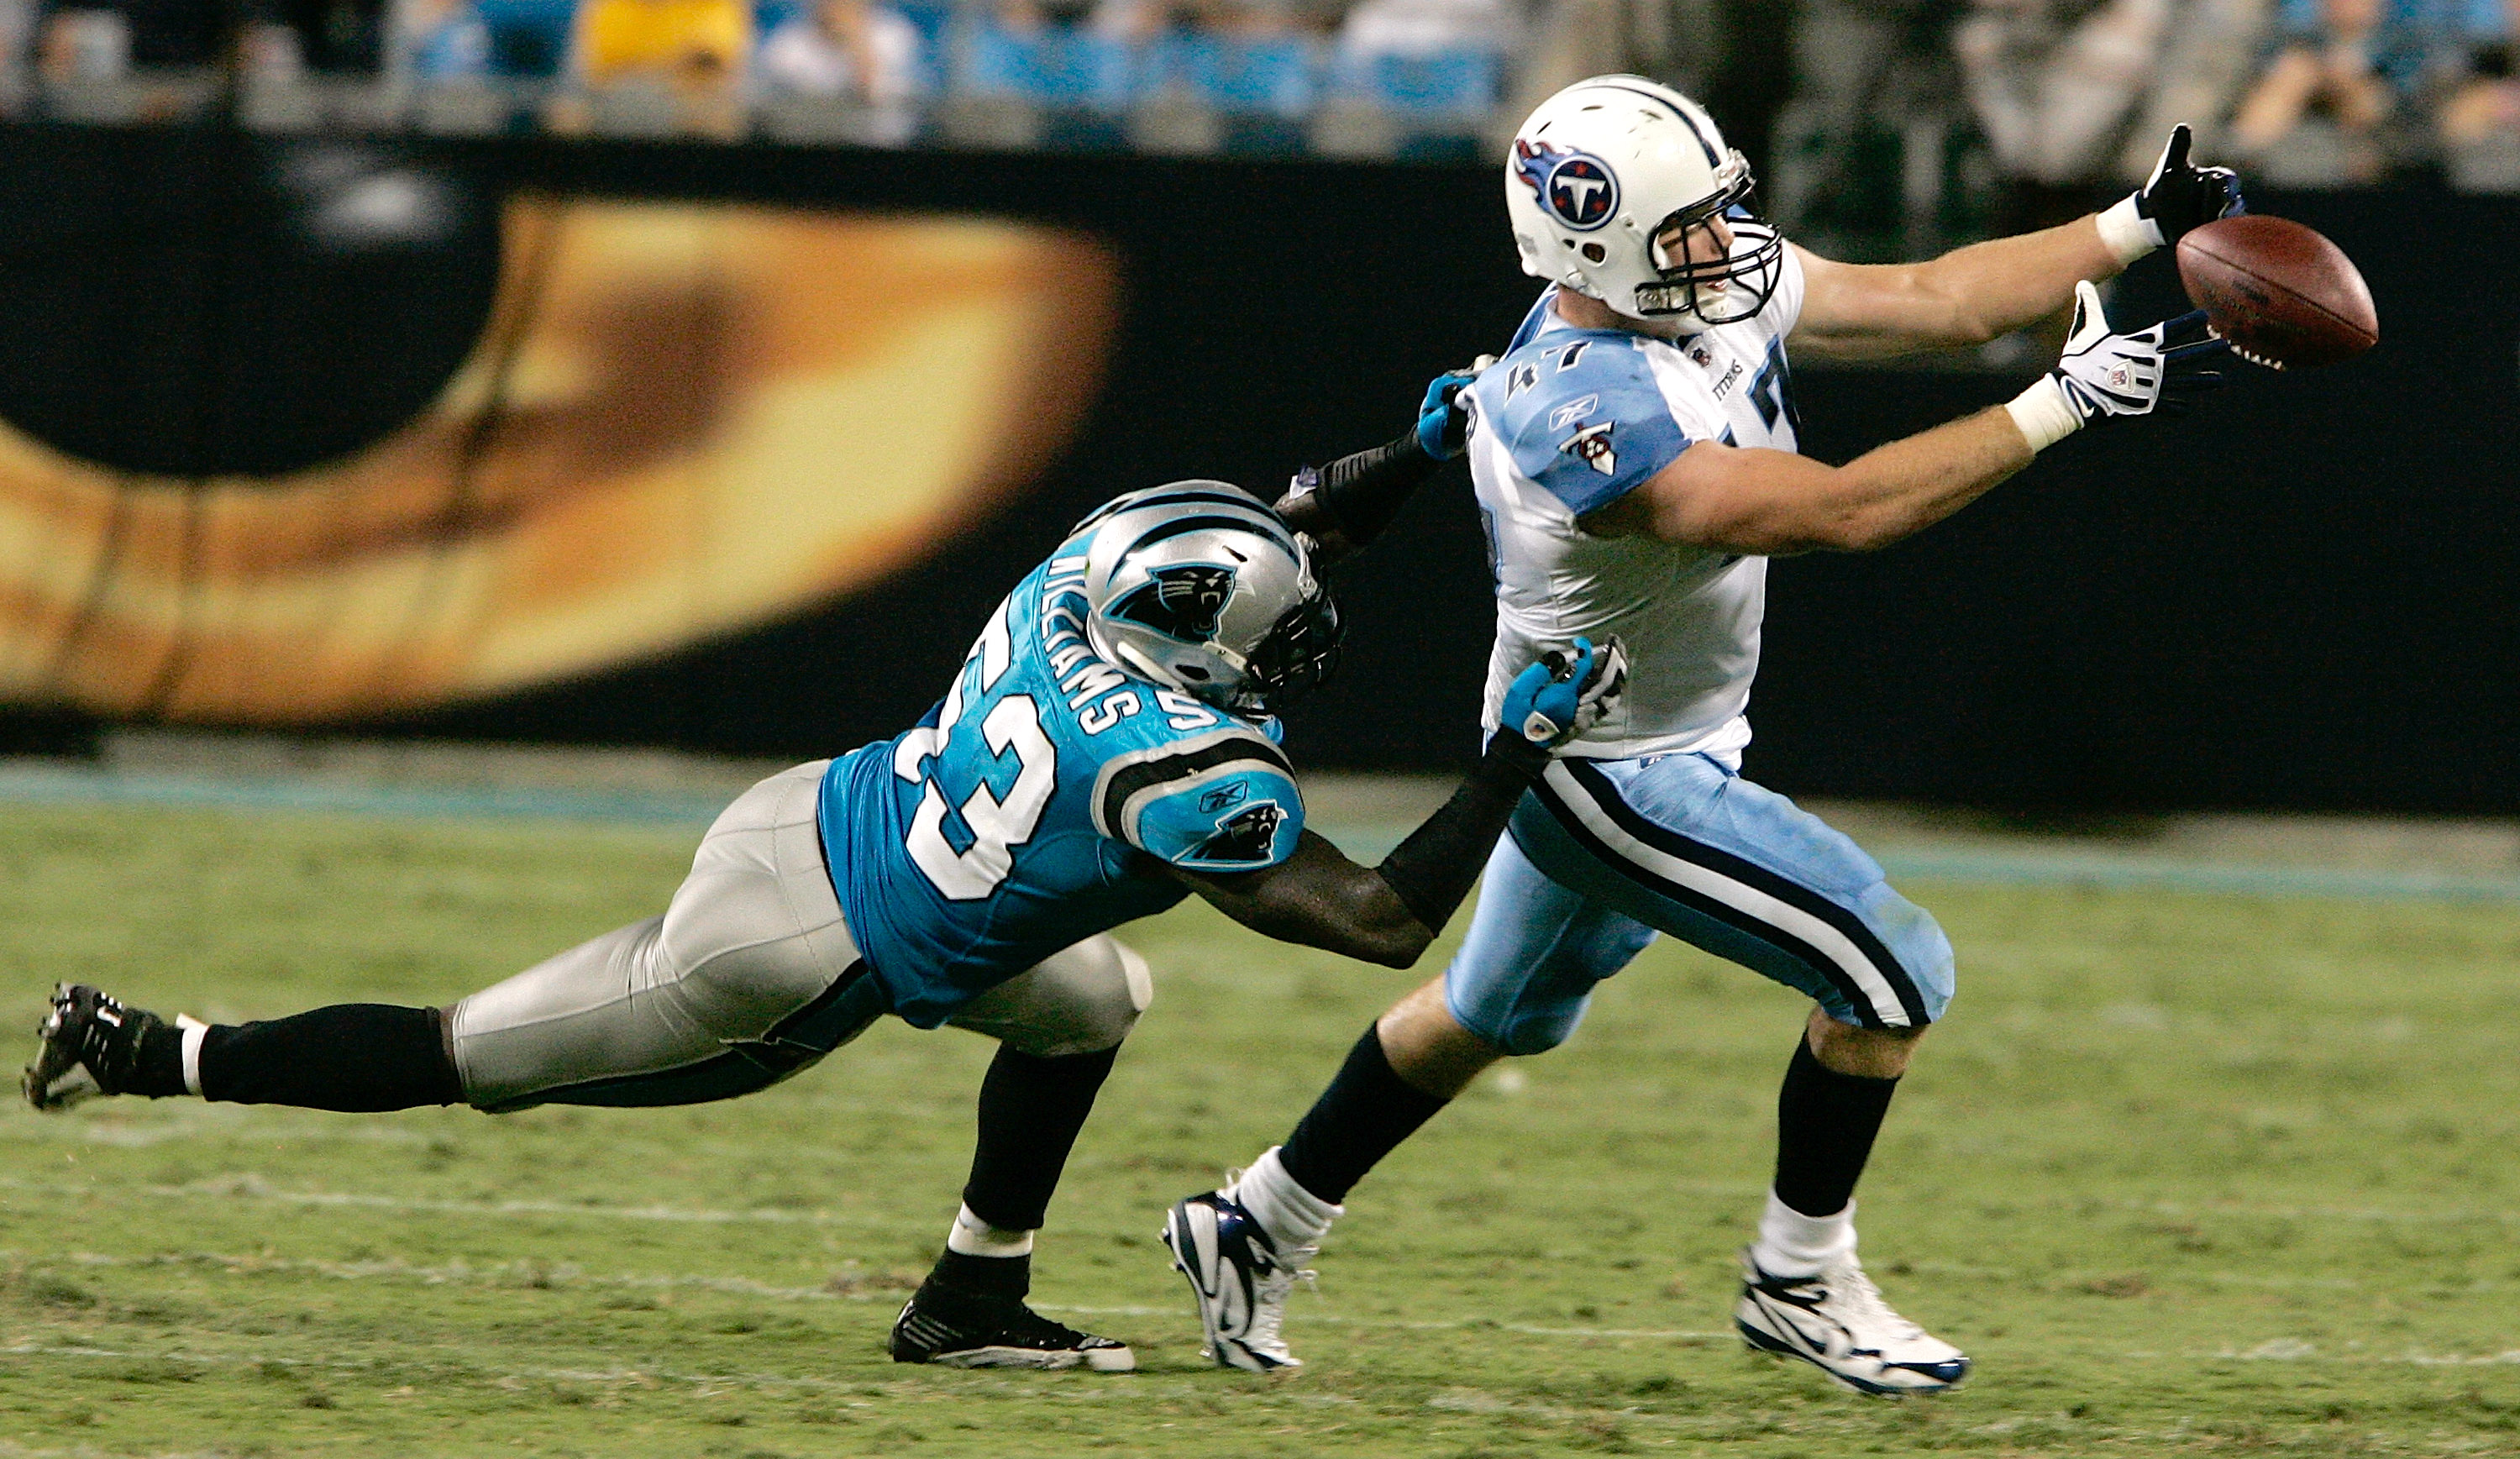 CHARLOTTE, NC - AUGUST 28: Wide receiver Damian Williams #17 of the Tennessee Titans drops the ball as Jamar Williams #53 of the Carolina Panthers drags him down during their preseason game at Bank of America Stadium on August 28, 2010 in Charlotte, North